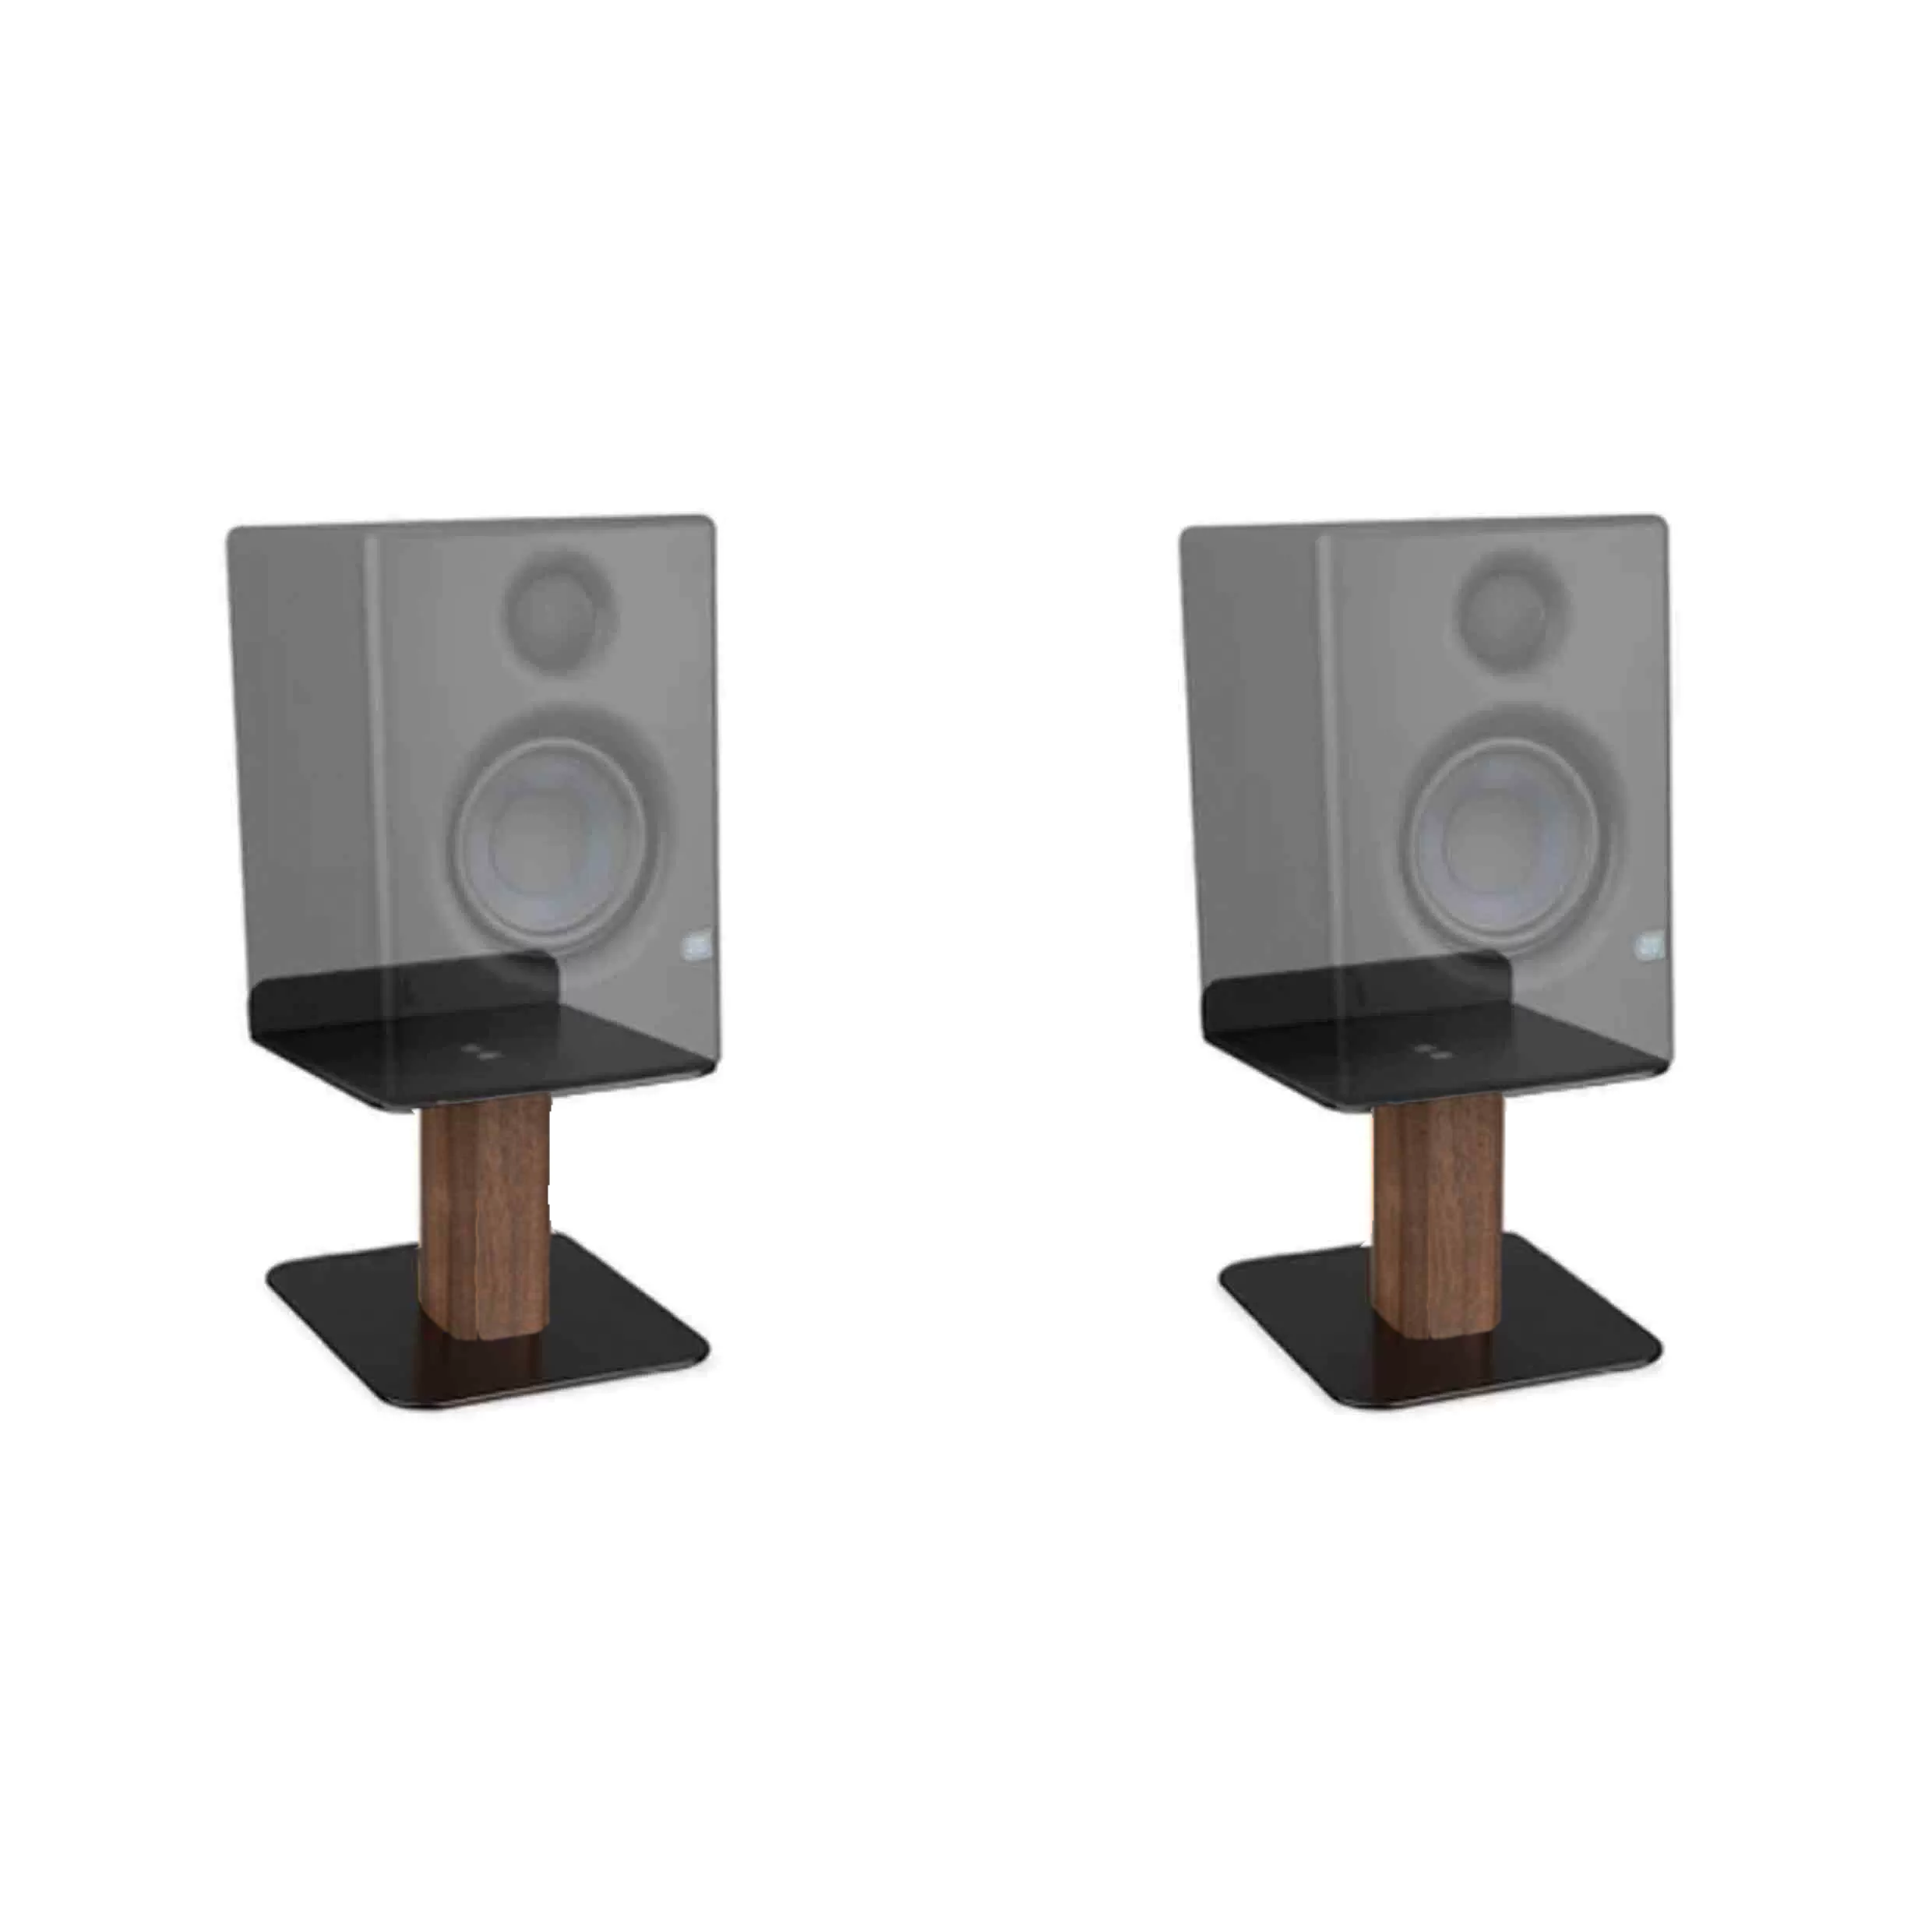 Wood Speaker Stand - Nordeco House